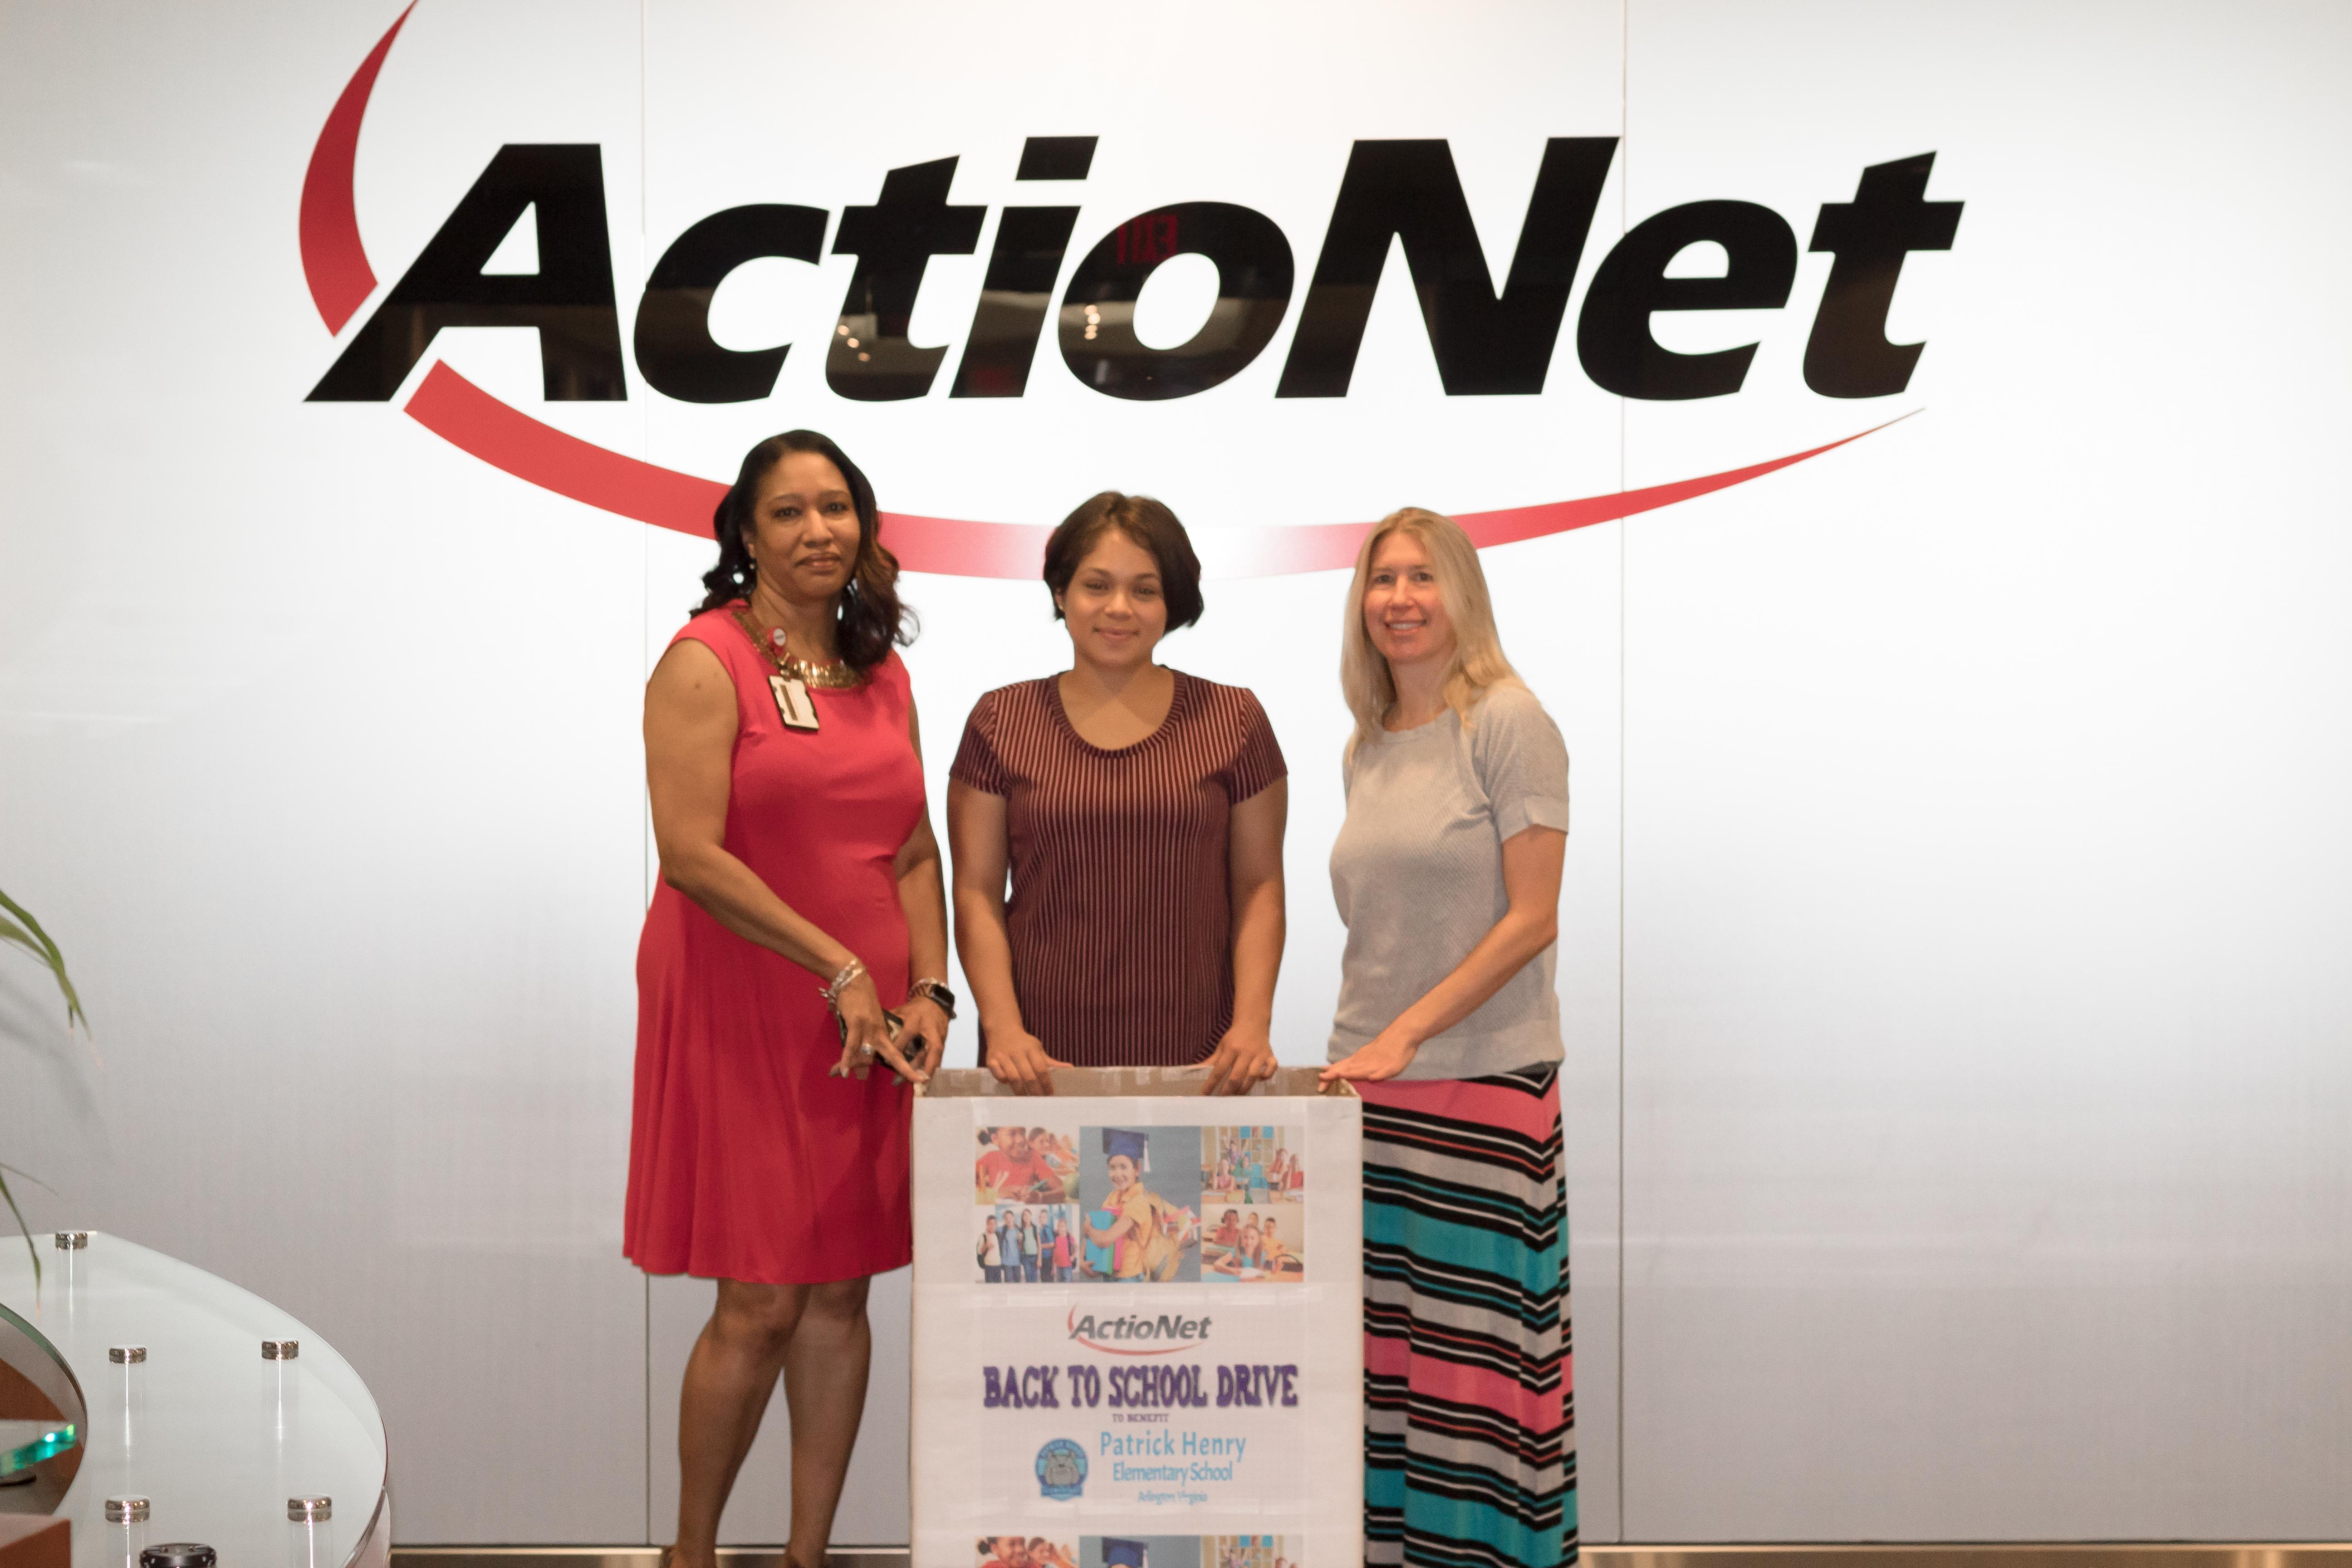 ActioNeters kicked off the donation drive by leaving out our collections box in the HQ lobby